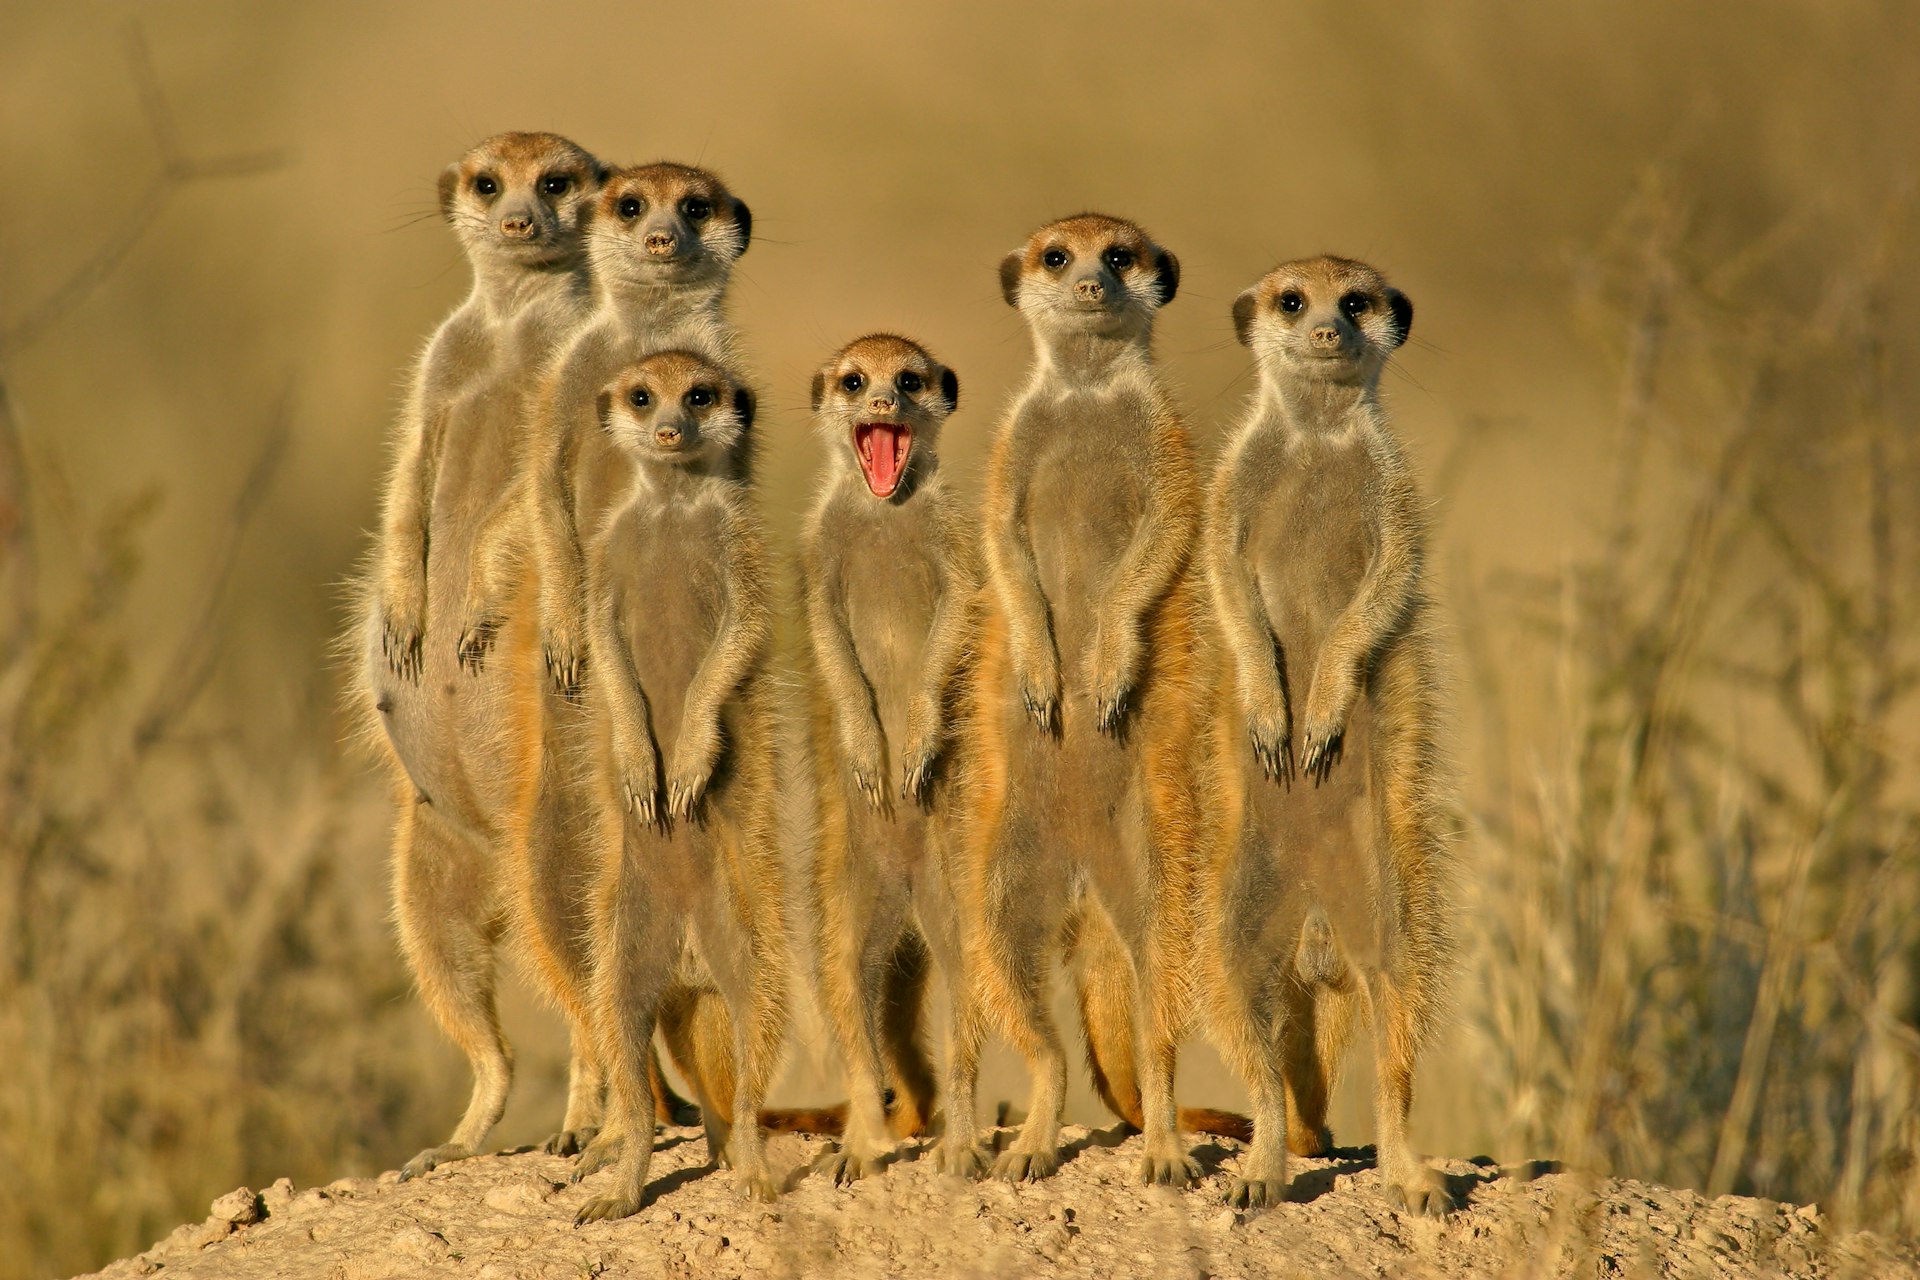 Six meerkats standing to attention, each with their arms identically placed at their fronts; all have their mouths shut, except for one which is wide open in a humorous fashion